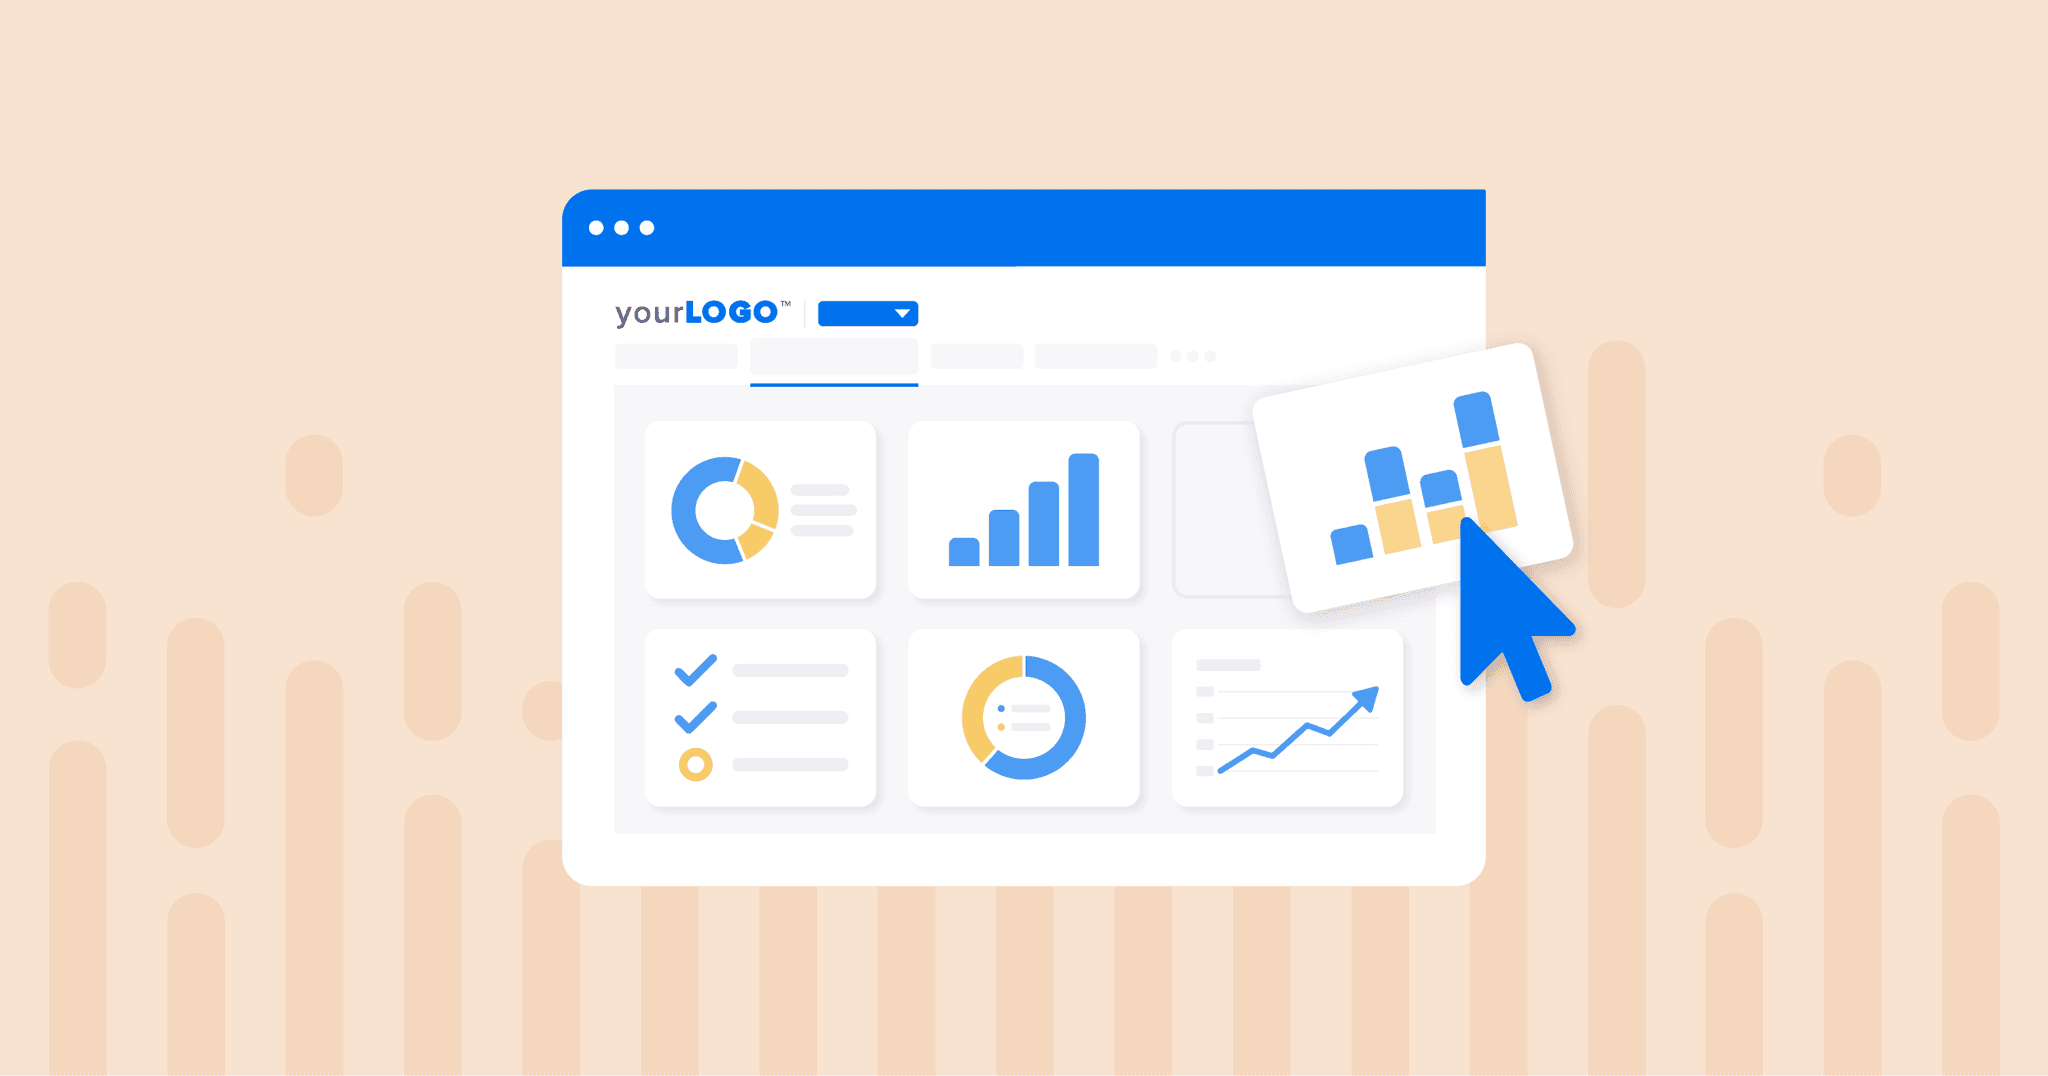 Learn how to create an effective analytics dashboard for your clients. Discover the key steps and insights to transform raw data into actionable information.